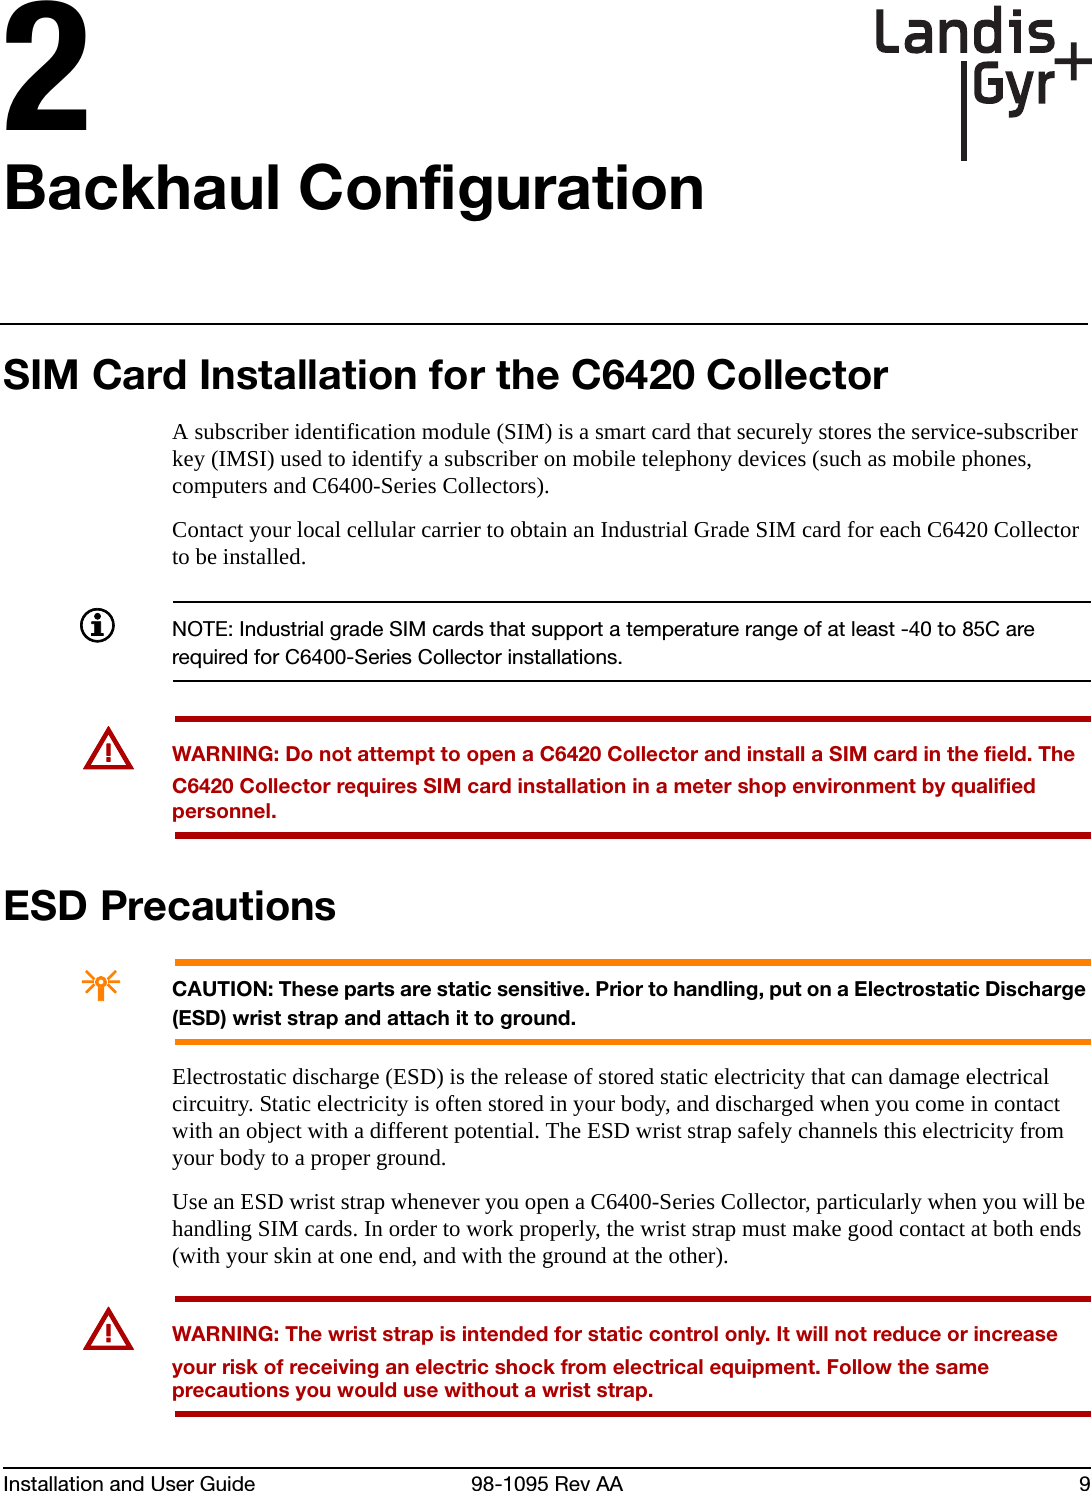 Installation and User Guide 98-1095 Rev AA 92Backhaul ConfigurationSIM Card Installation for the C6420 CollectorA subscriber identification module (SIM) is a smart card that securely stores the service-subscriber key (IMSI) used to identify a subscriber on mobile telephony devices (such as mobile phones, computers and C6400-Series Collectors).Contact your local cellular carrier to obtain an Industrial Grade SIM card for each C6420 Collector to be installed. NOTE: Industrial grade SIM cards that support a temperature range of at least -40 to 85C are required for C6400-Series Collector installations.UWARNING: Do not attempt to open a C6420 Collector and install a SIM card in the field. The C6420 Collector requires SIM card installation in a meter shop environment by qualified personnel.ESD PrecautionsACAUTION: These parts are static sensitive. Prior to handling, put on a Electrostatic Discharge (ESD) wrist strap and attach it to ground.Electrostatic discharge (ESD) is the release of stored static electricity that can damage electrical circuitry. Static electricity is often stored in your body, and discharged when you come in contact with an object with a different potential. The ESD wrist strap safely channels this electricity from your body to a proper ground.Use an ESD wrist strap whenever you open a C6400-Series Collector, particularly when you will be handling SIM cards. In order to work properly, the wrist strap must make good contact at both ends (with your skin at one end, and with the ground at the other).UWARNING: The wrist strap is intended for static control only. It will not reduce or increase your risk of receiving an electric shock from electrical equipment. Follow the same precautions you would use without a wrist strap.